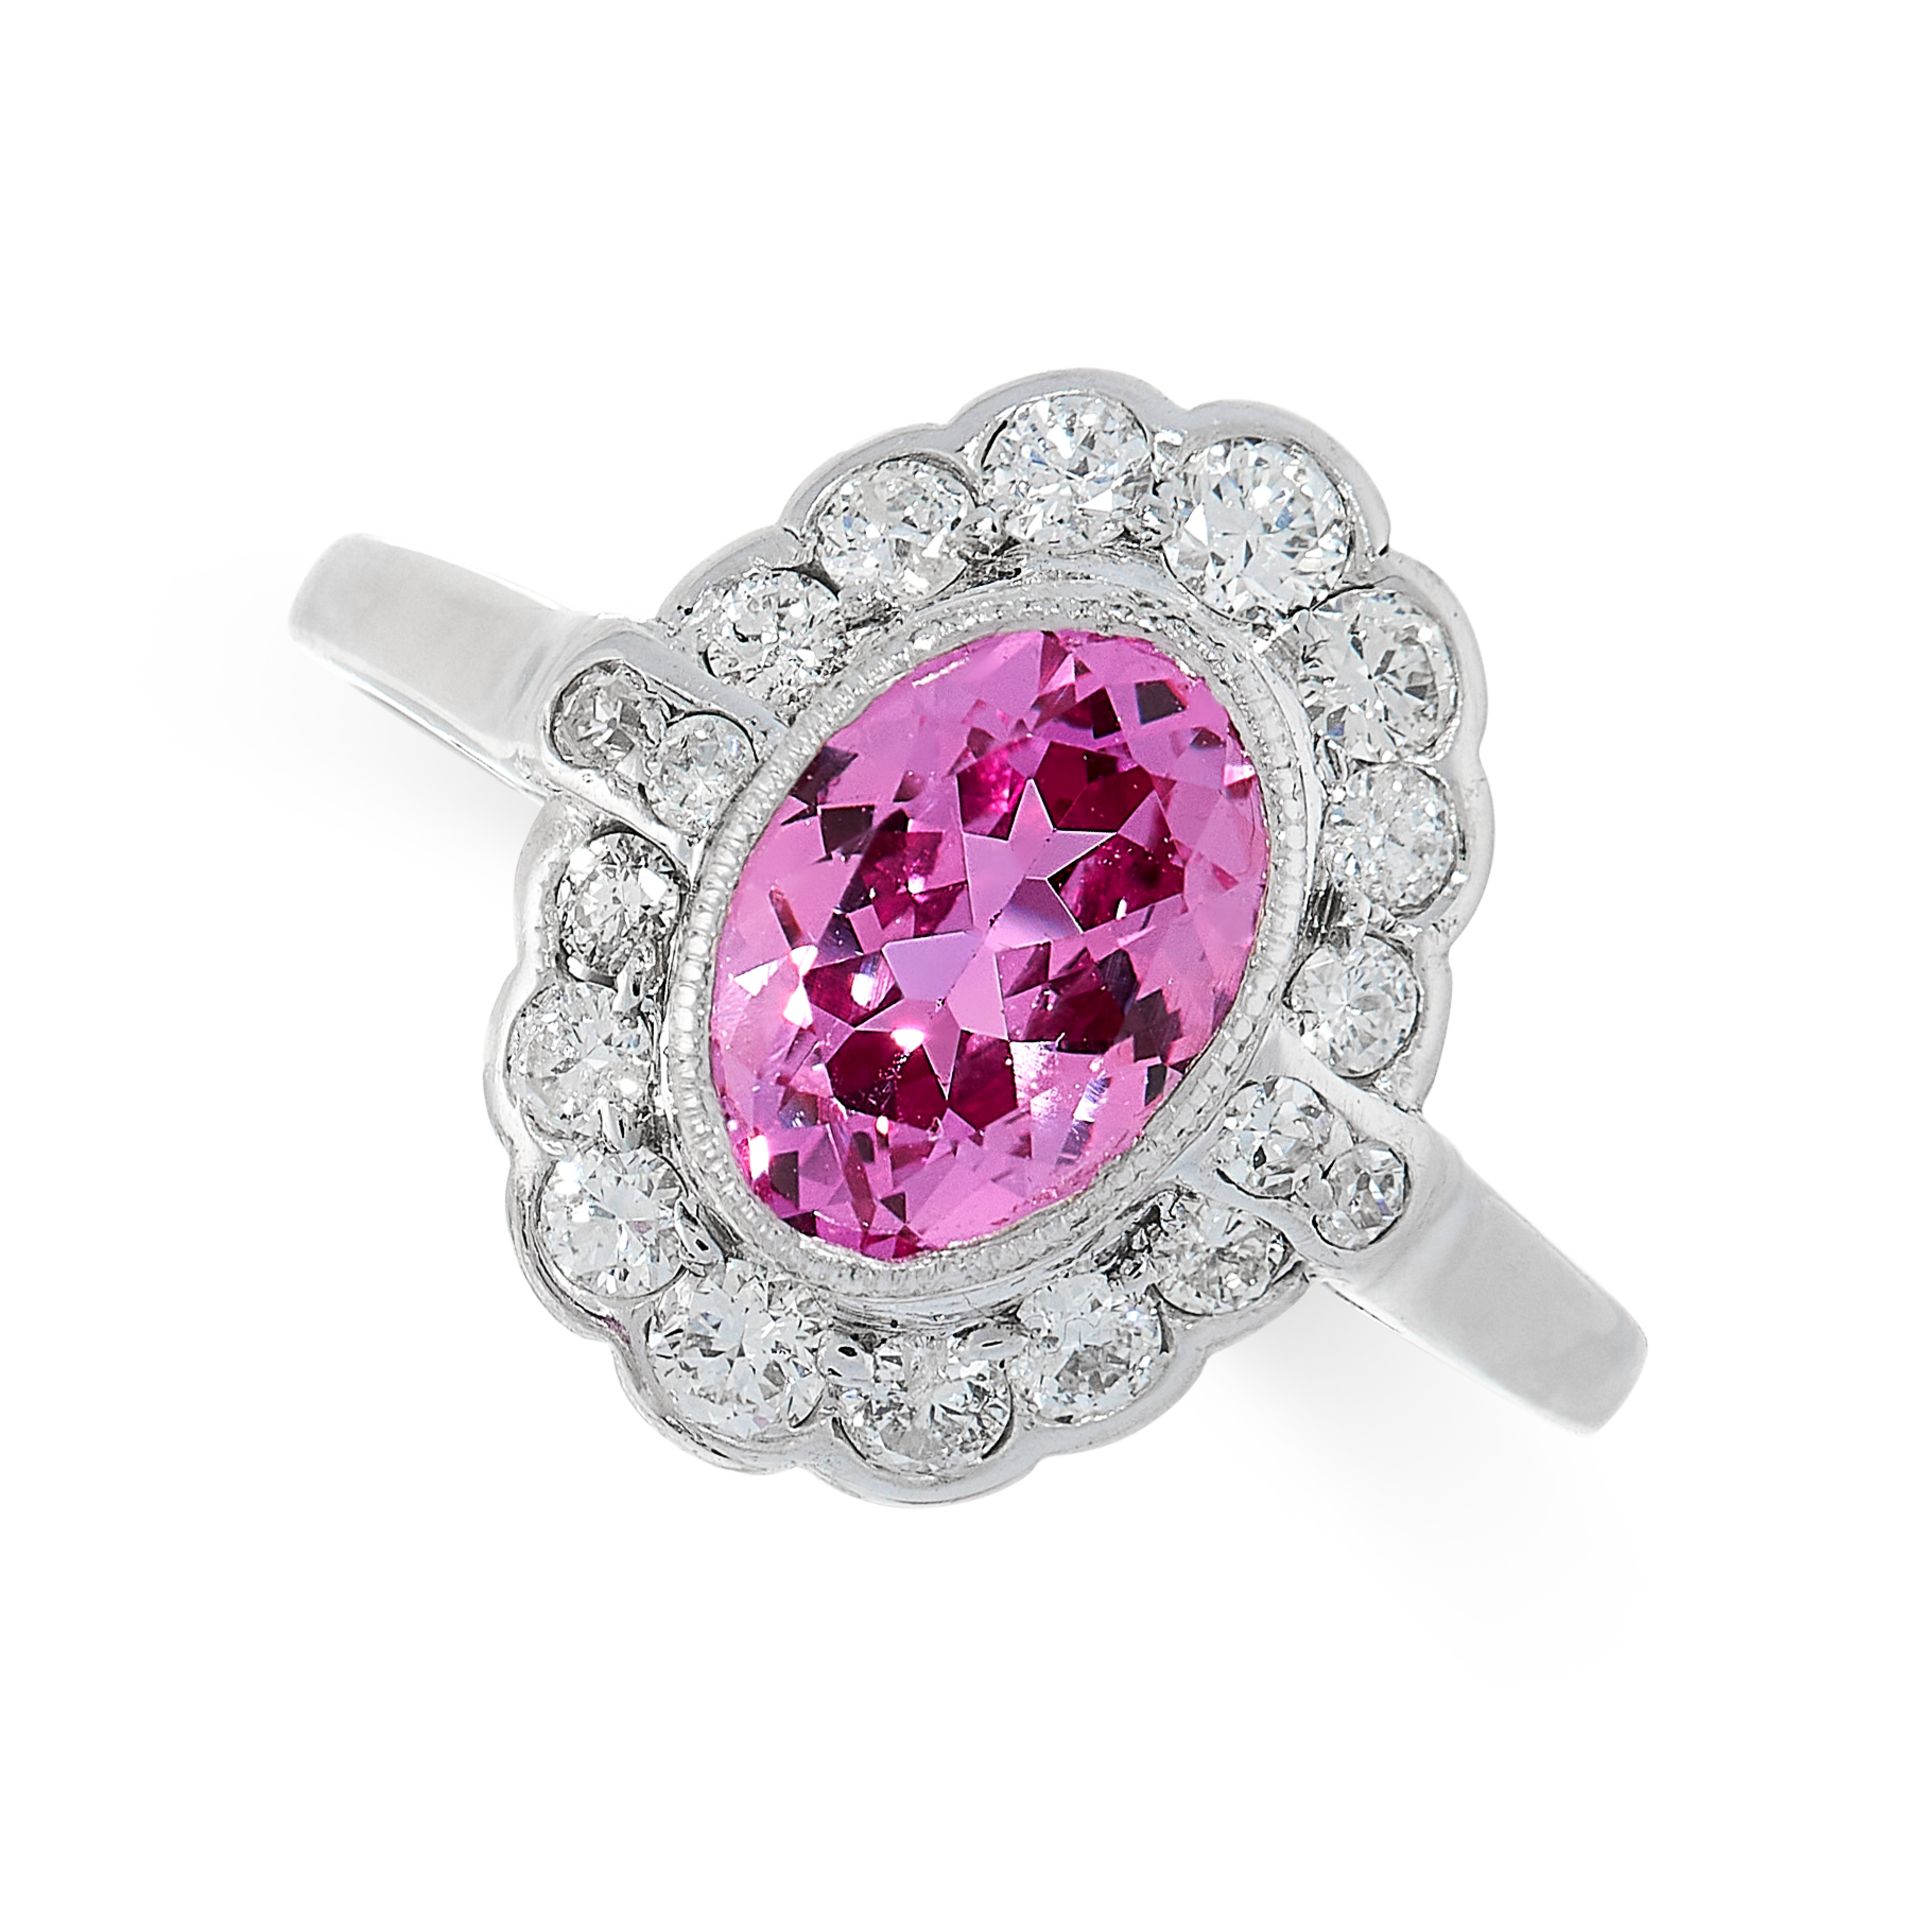 UNHEATED PINK SAPPHIRE AND DIAMOND RING set to the centre with an oval cut pink sapphire of 2.09